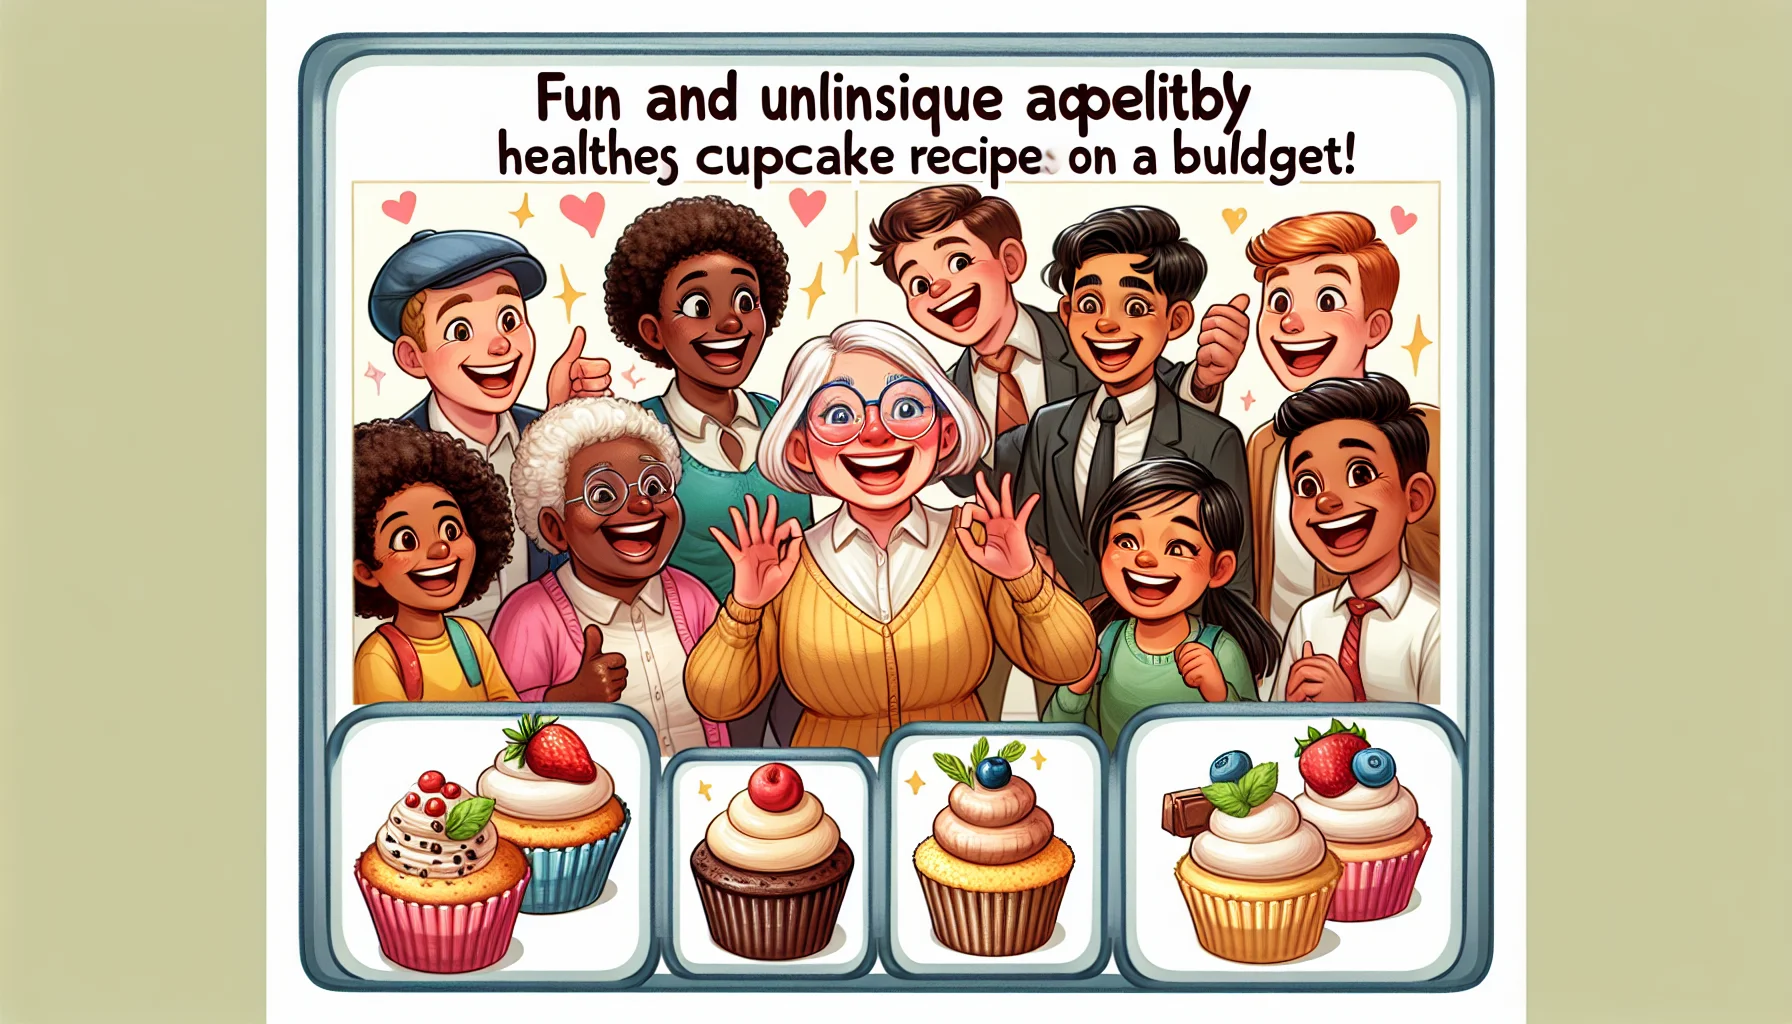 A cheerful illustration highlighting a comical scene around fun and unique healthy cupcake recipes on a budget. Display a variety of distinctive types of cupcakes, each composed of all-natural ingredients representing affordable healthy choices. Also, picture an unexpected group of frame-filling happy customers delightfully surprised by these cupcake alternatives. Among the shoppers: a Caucasian female senior citizen, a black schoolboy in uniform, a Middle-Eastern young woman with a nose ring and a South Asian gentleman in business attire. Make sure that the atmosphere of the scene is light-hearted and creates a warm, inviting picture of budget-friendly healthy indulgence.